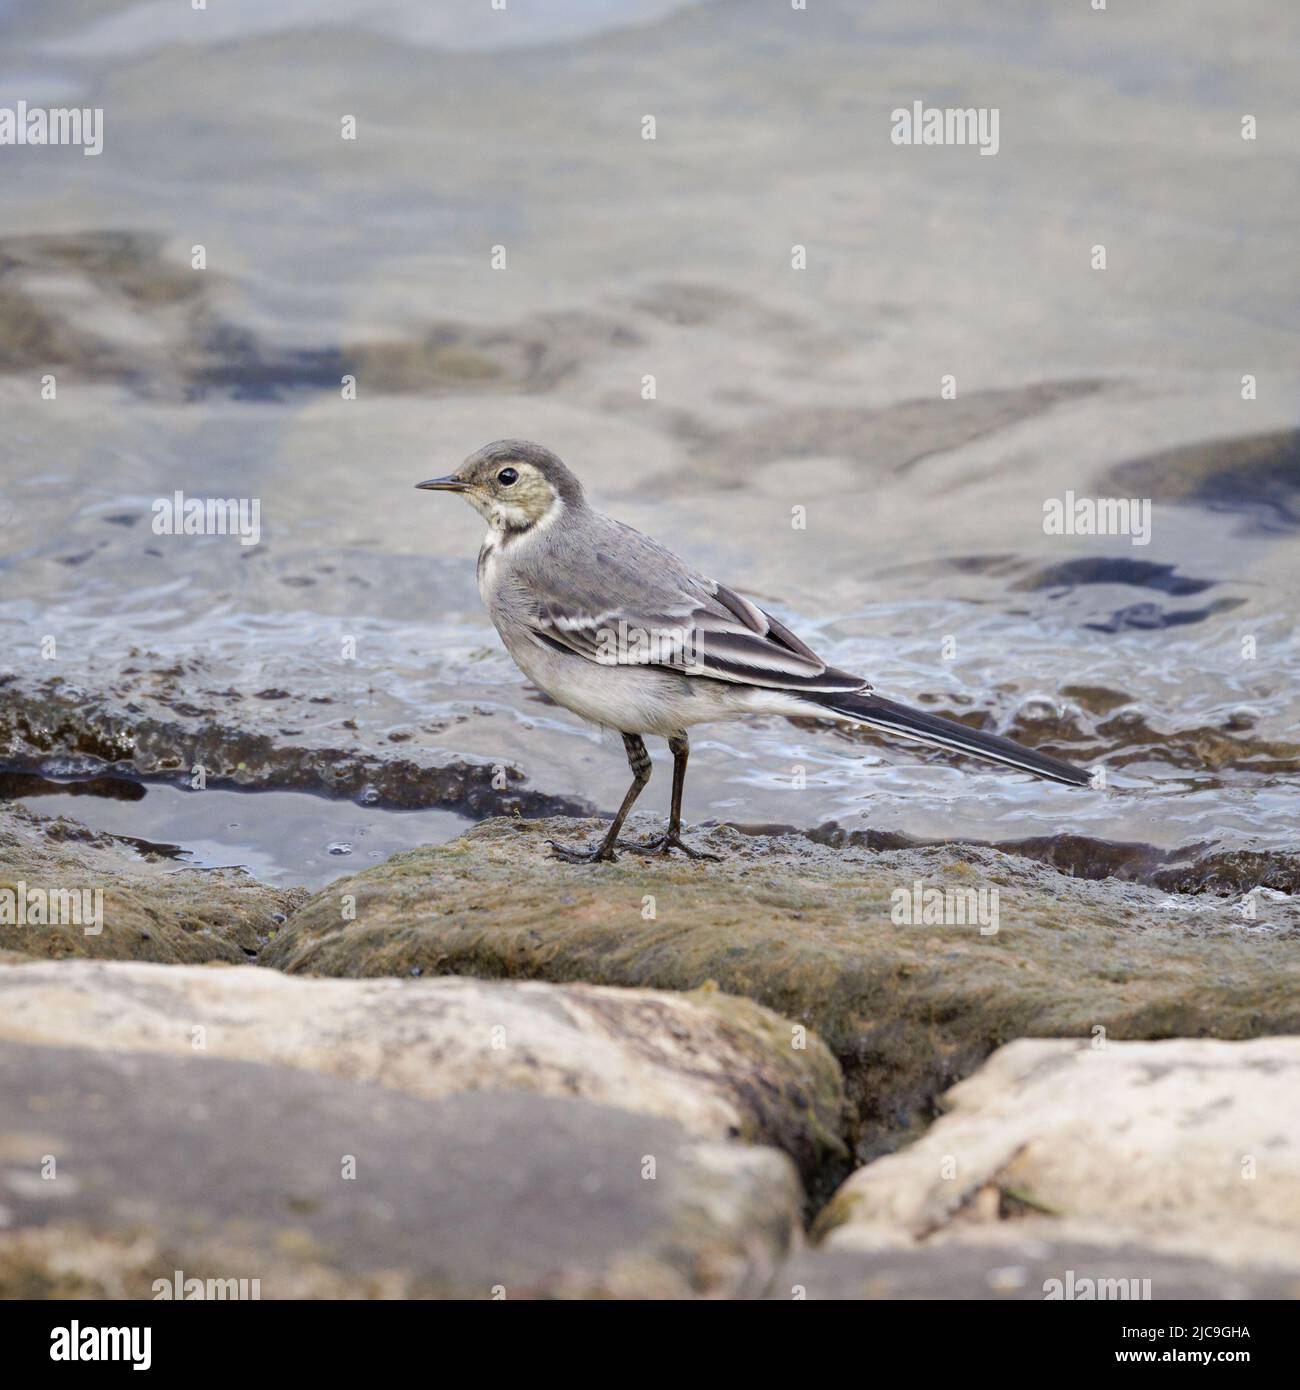 Northamptonshire, UK: In early June a juvenile pied wagtail (Motacilla alba) stands on a stone at the waters edge. Stock Photo